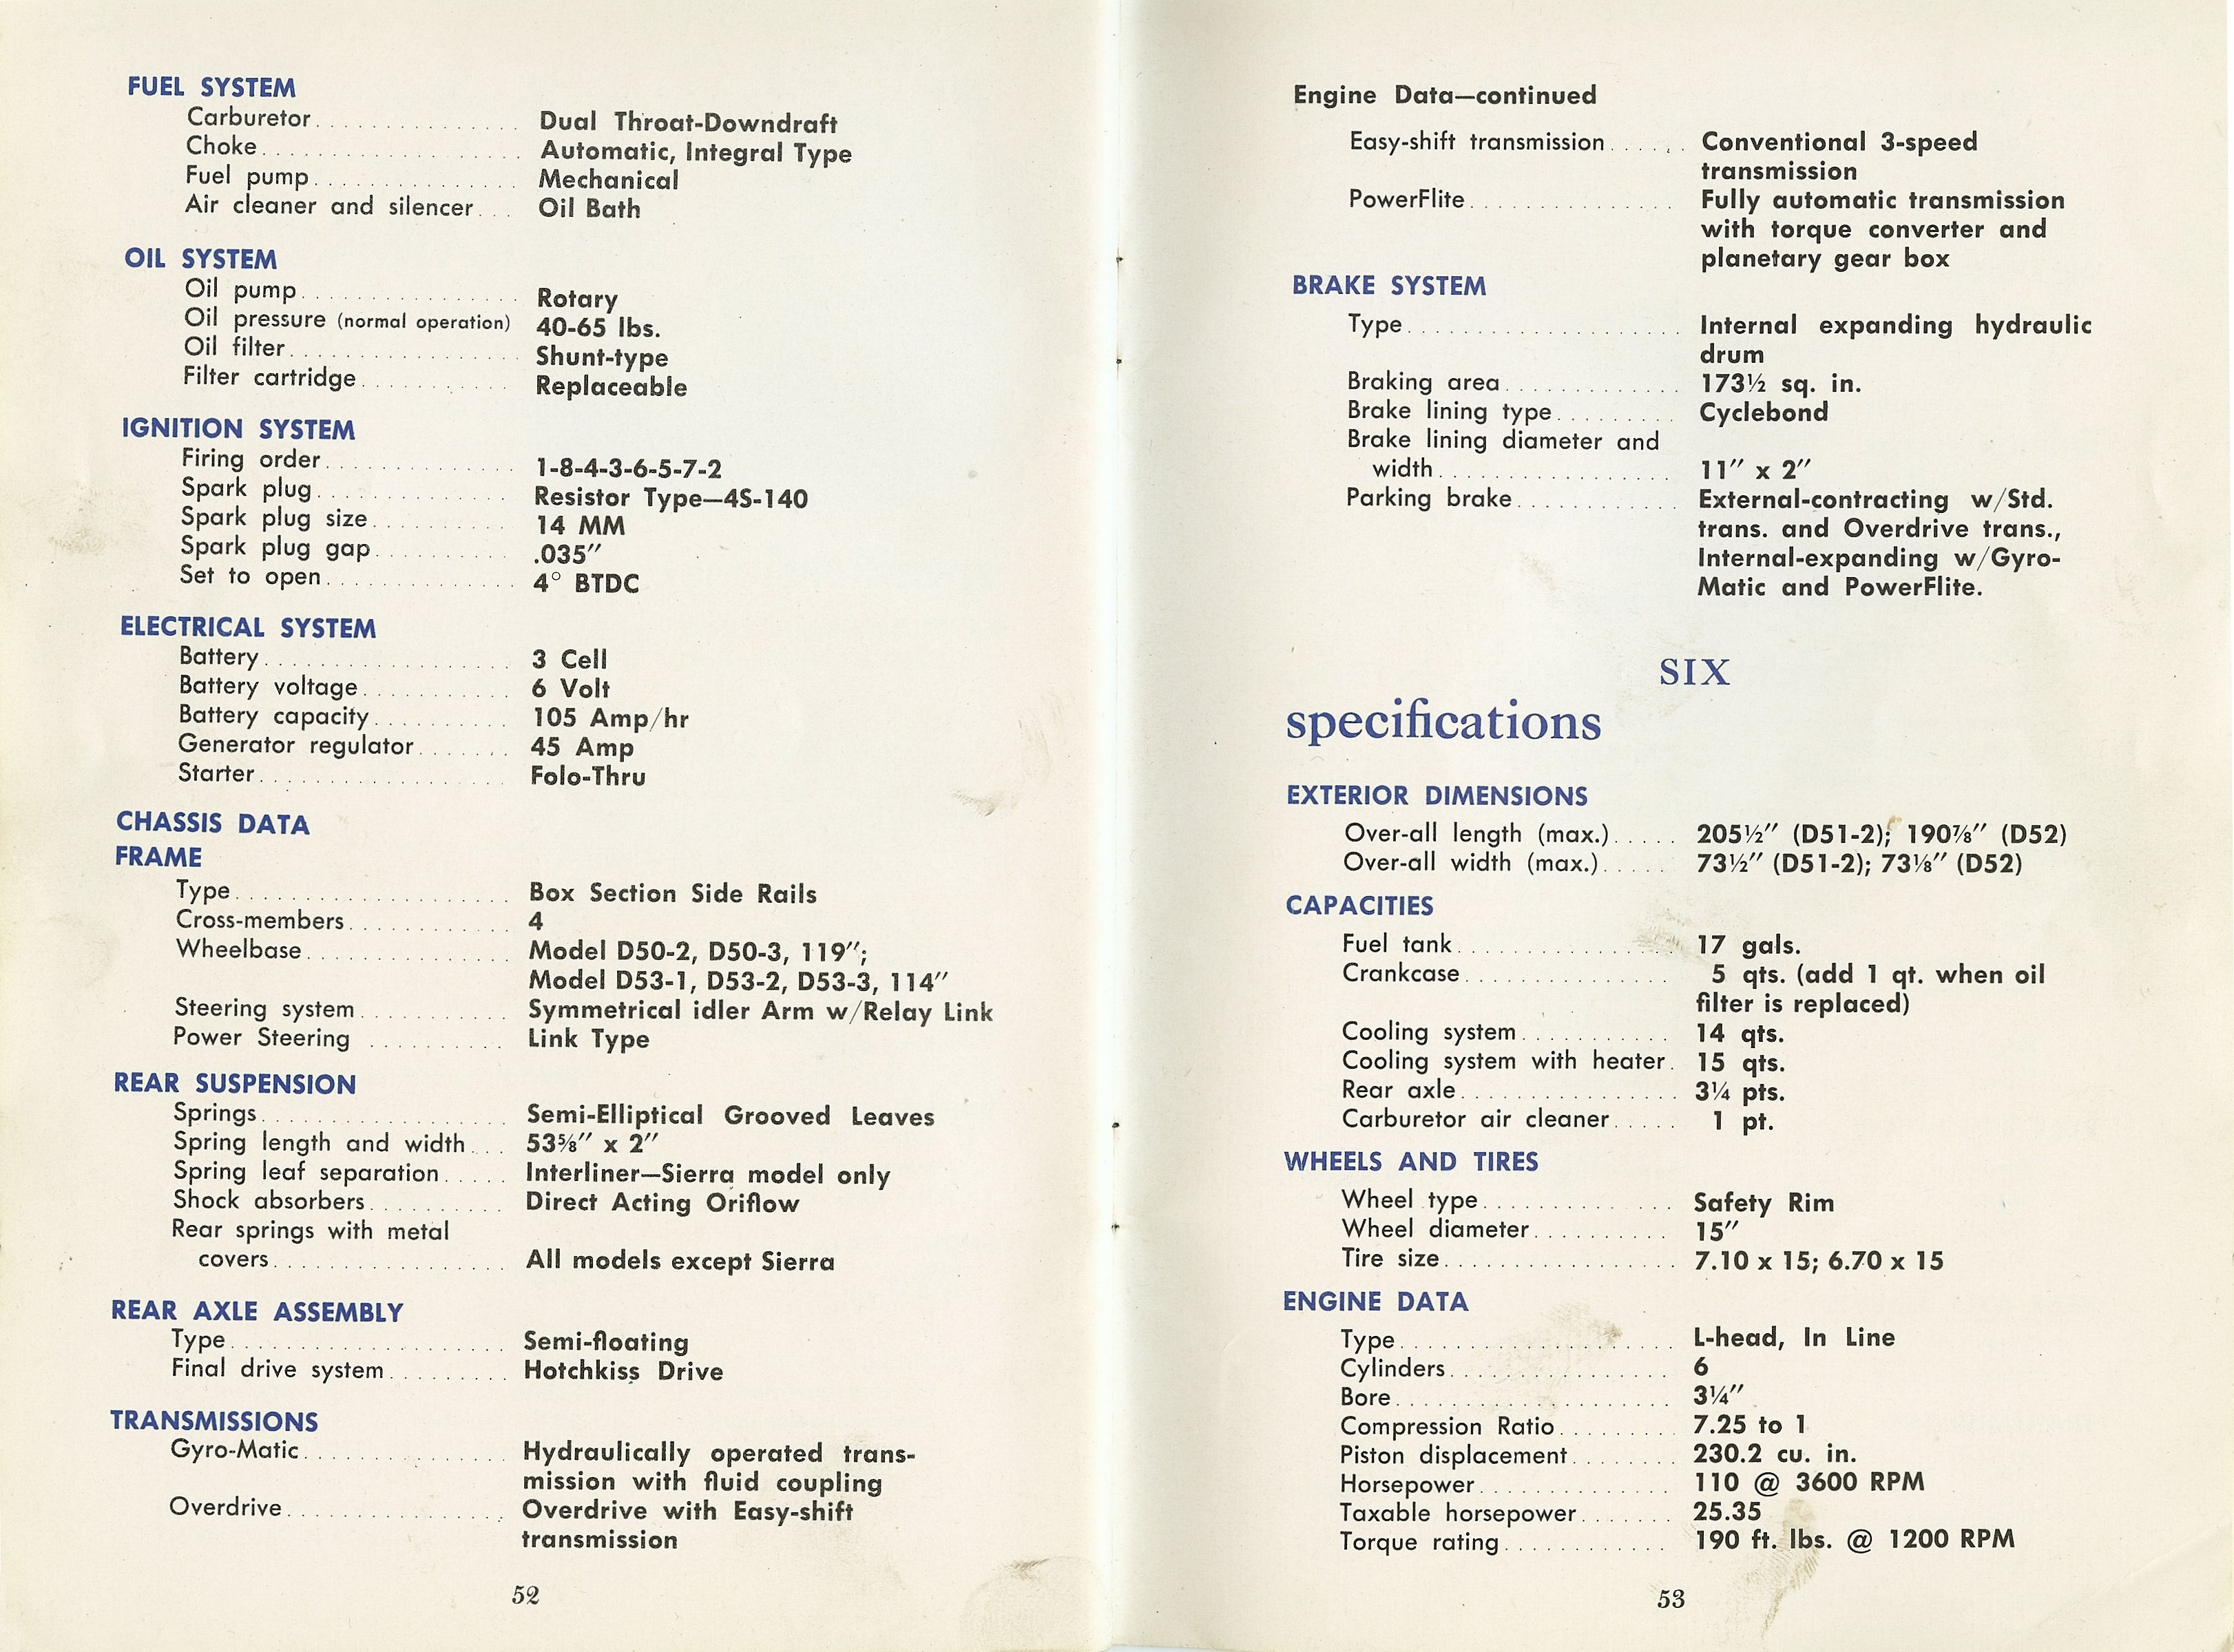 1954_Dodge_Owners_Manual-52-53